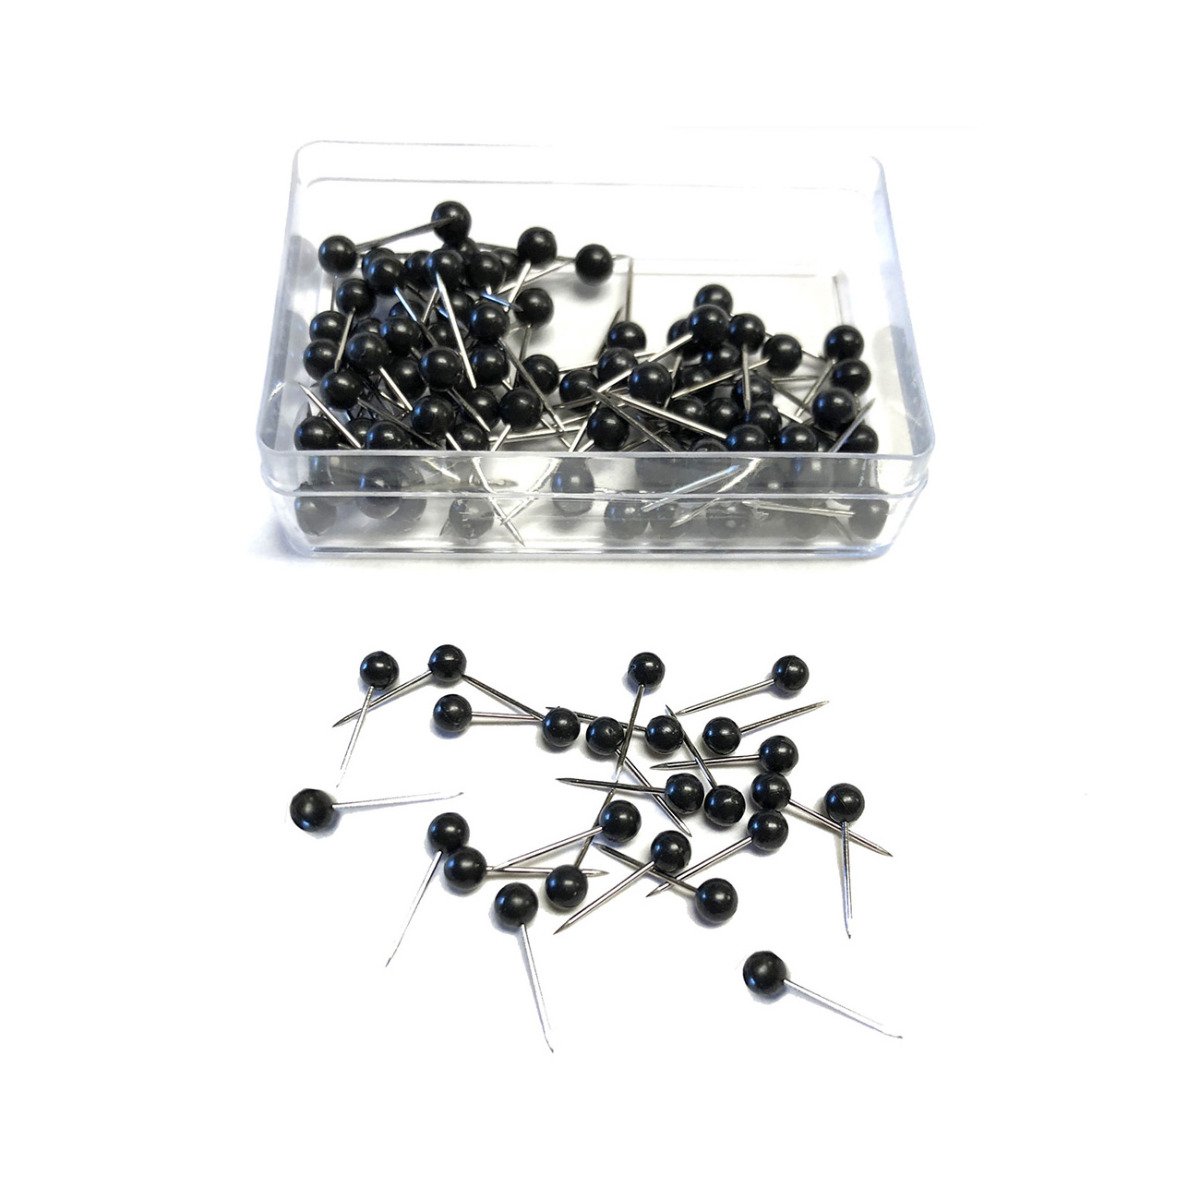 Ryder & Co. Black & White Push Pins, 120 Pieces